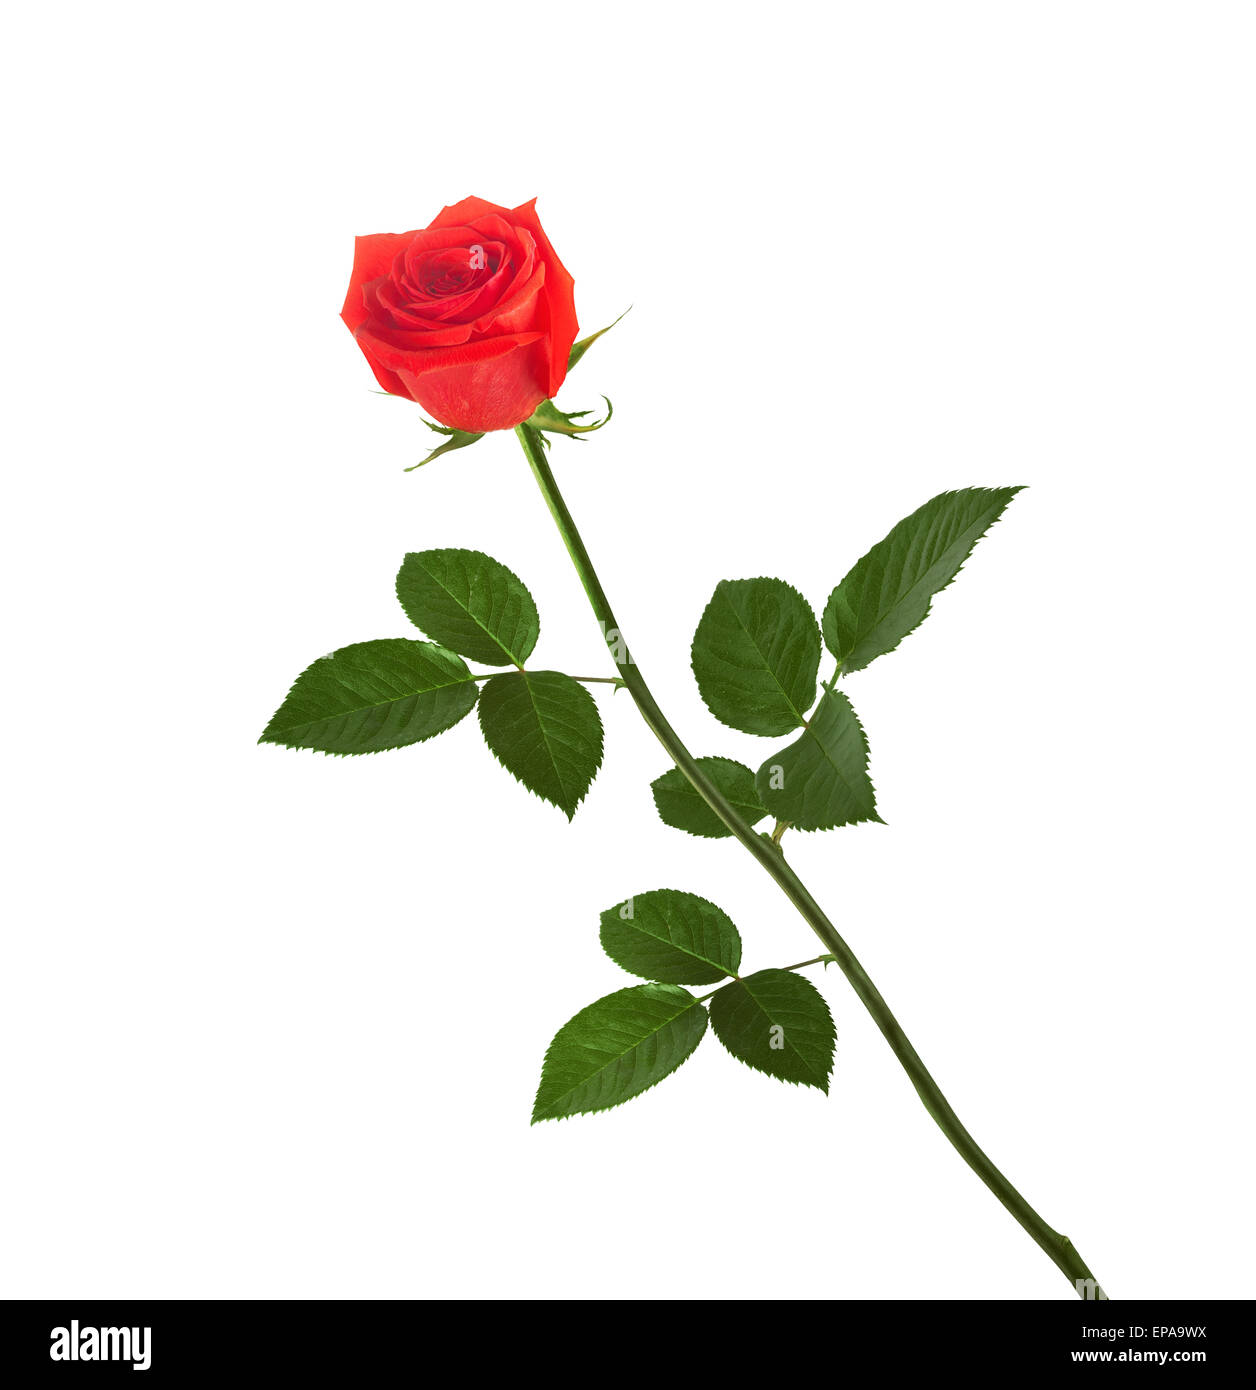 Red rose with green leaves isolated on white background Stock Photo